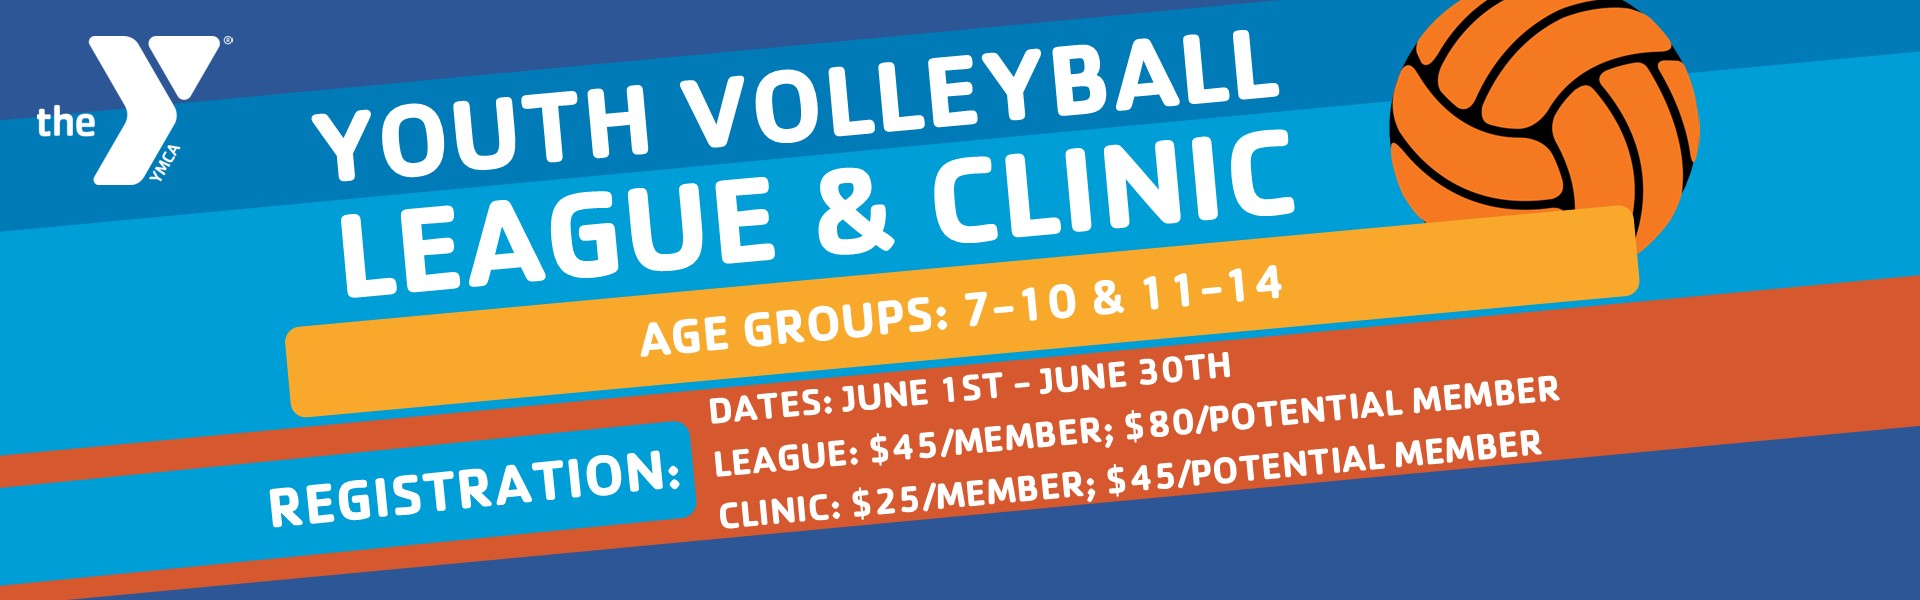 YOUTH VOLLEYBALL LEAGUE